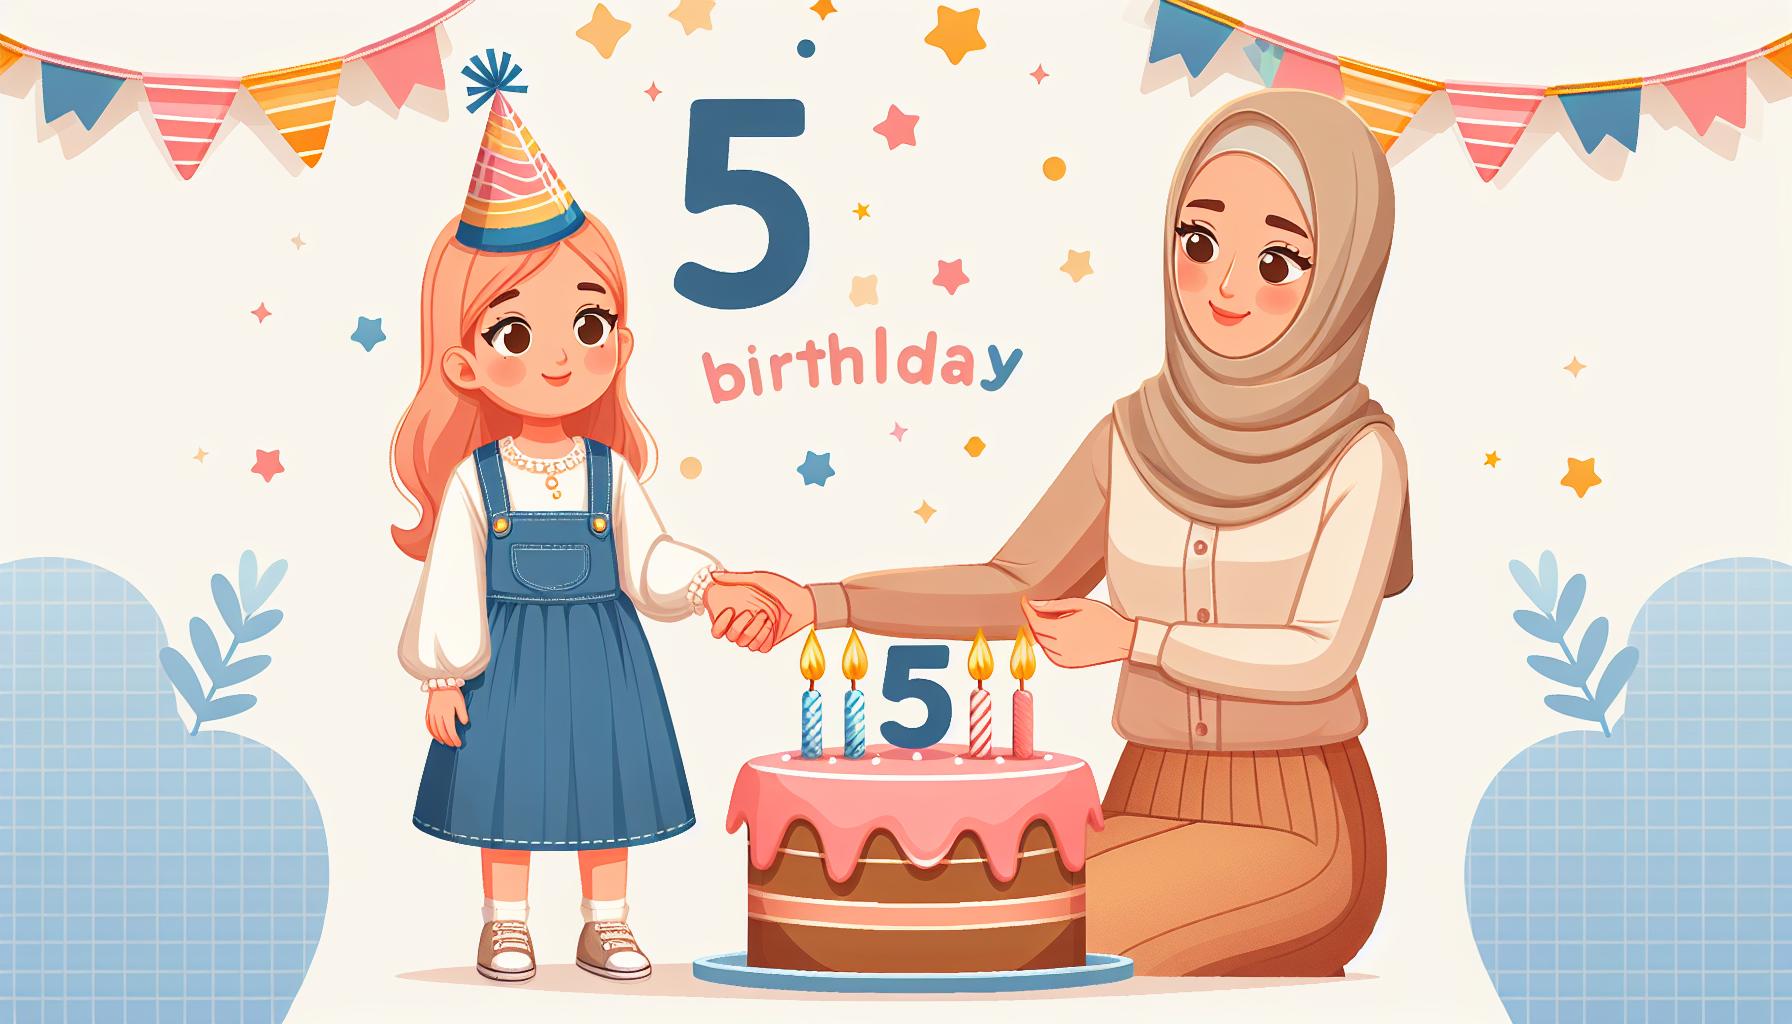 Creating Unforgettable 5th Birthday Wishes for Your Daughter